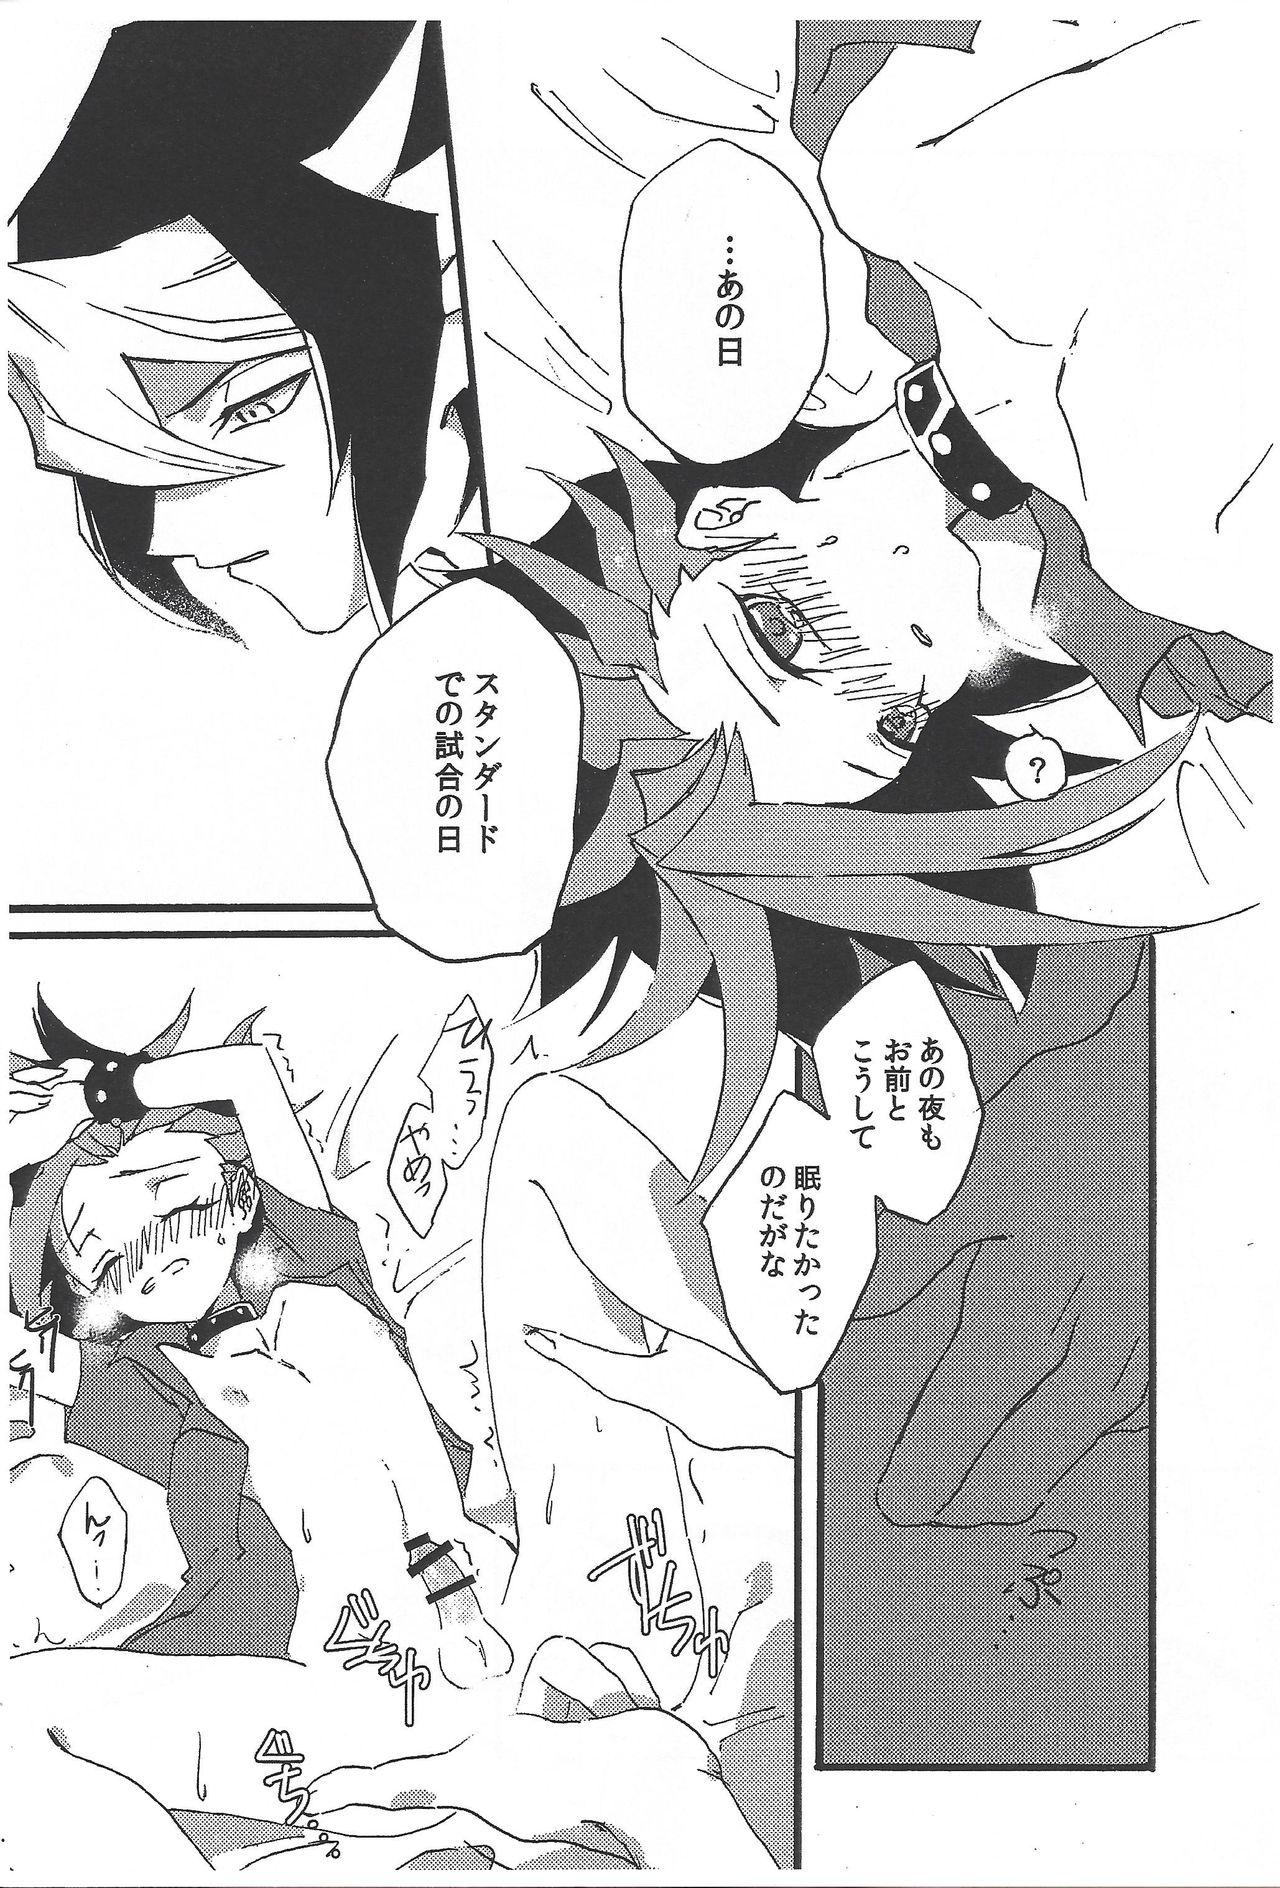 Private GHOST ROOM - Yu-gi-oh arc-v Foot Worship - Page 6